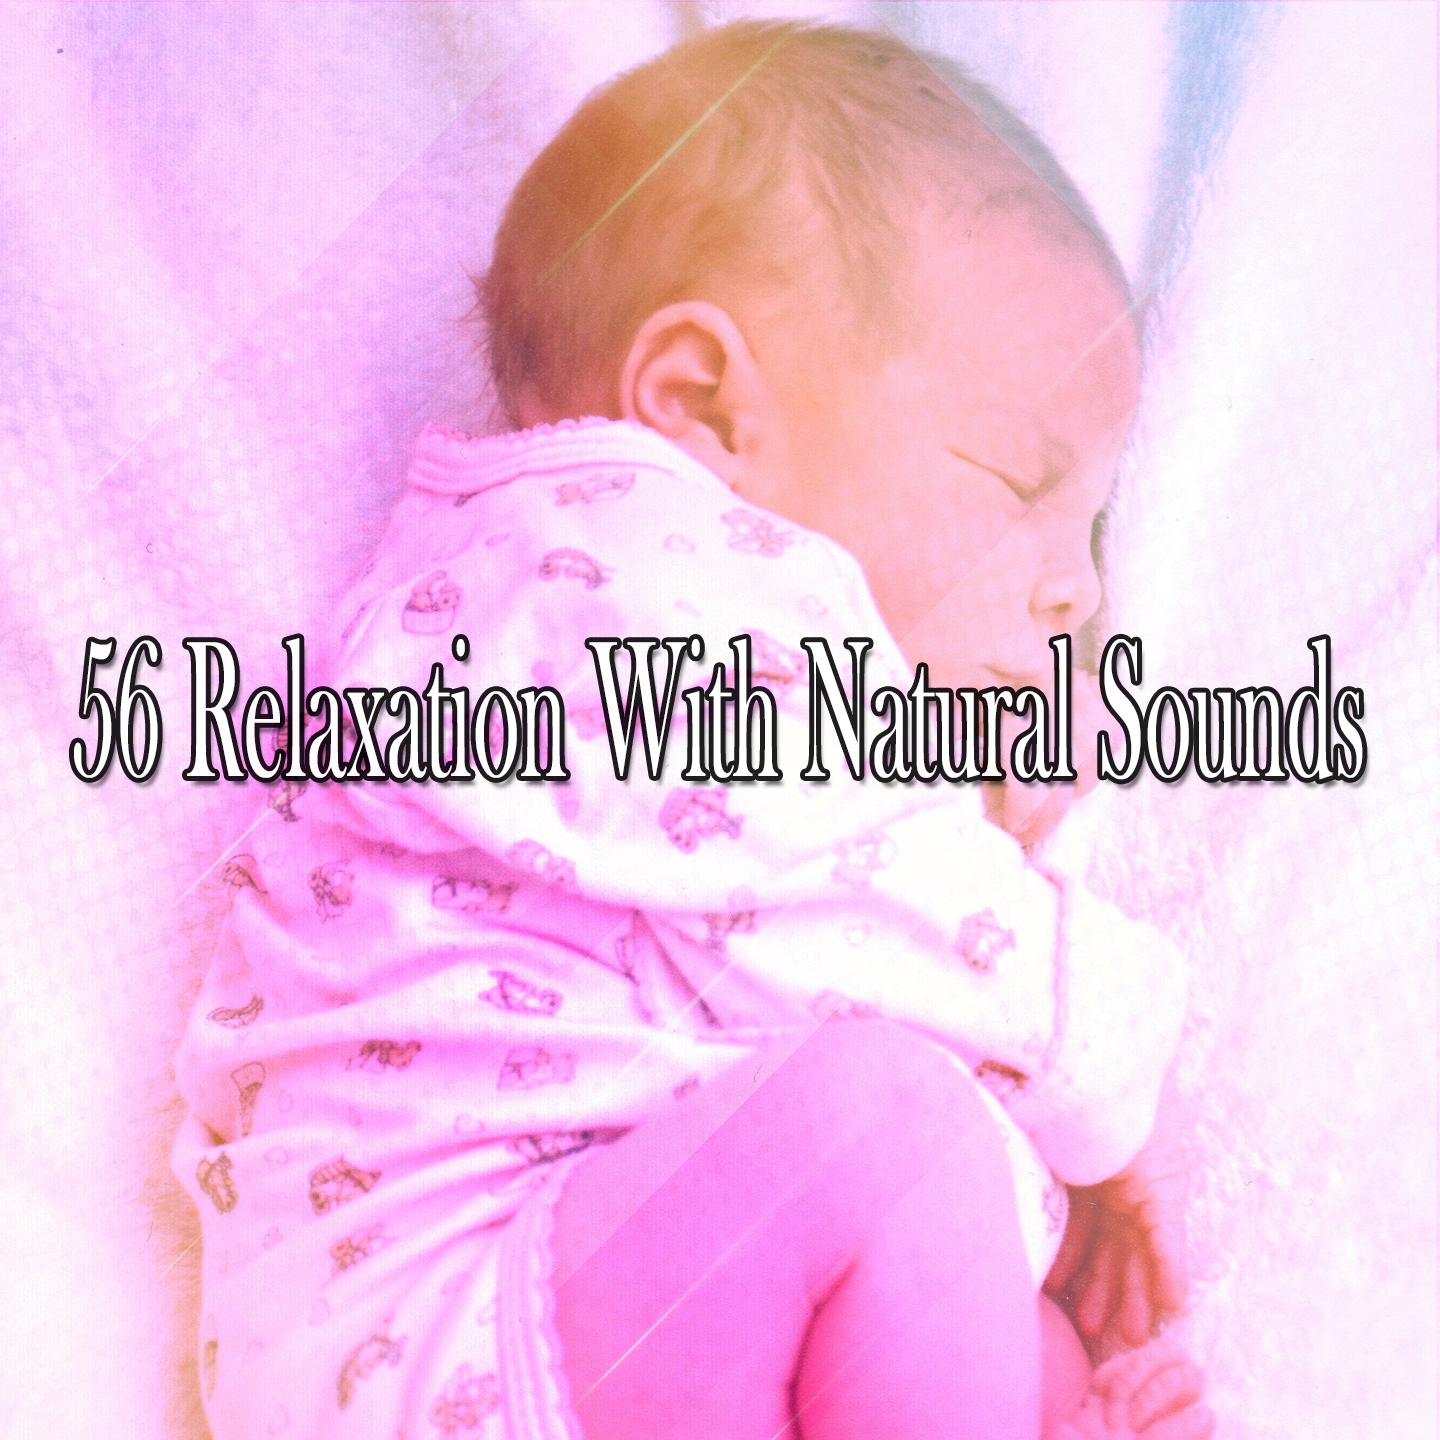 56 Relaxation With Natural Sounds